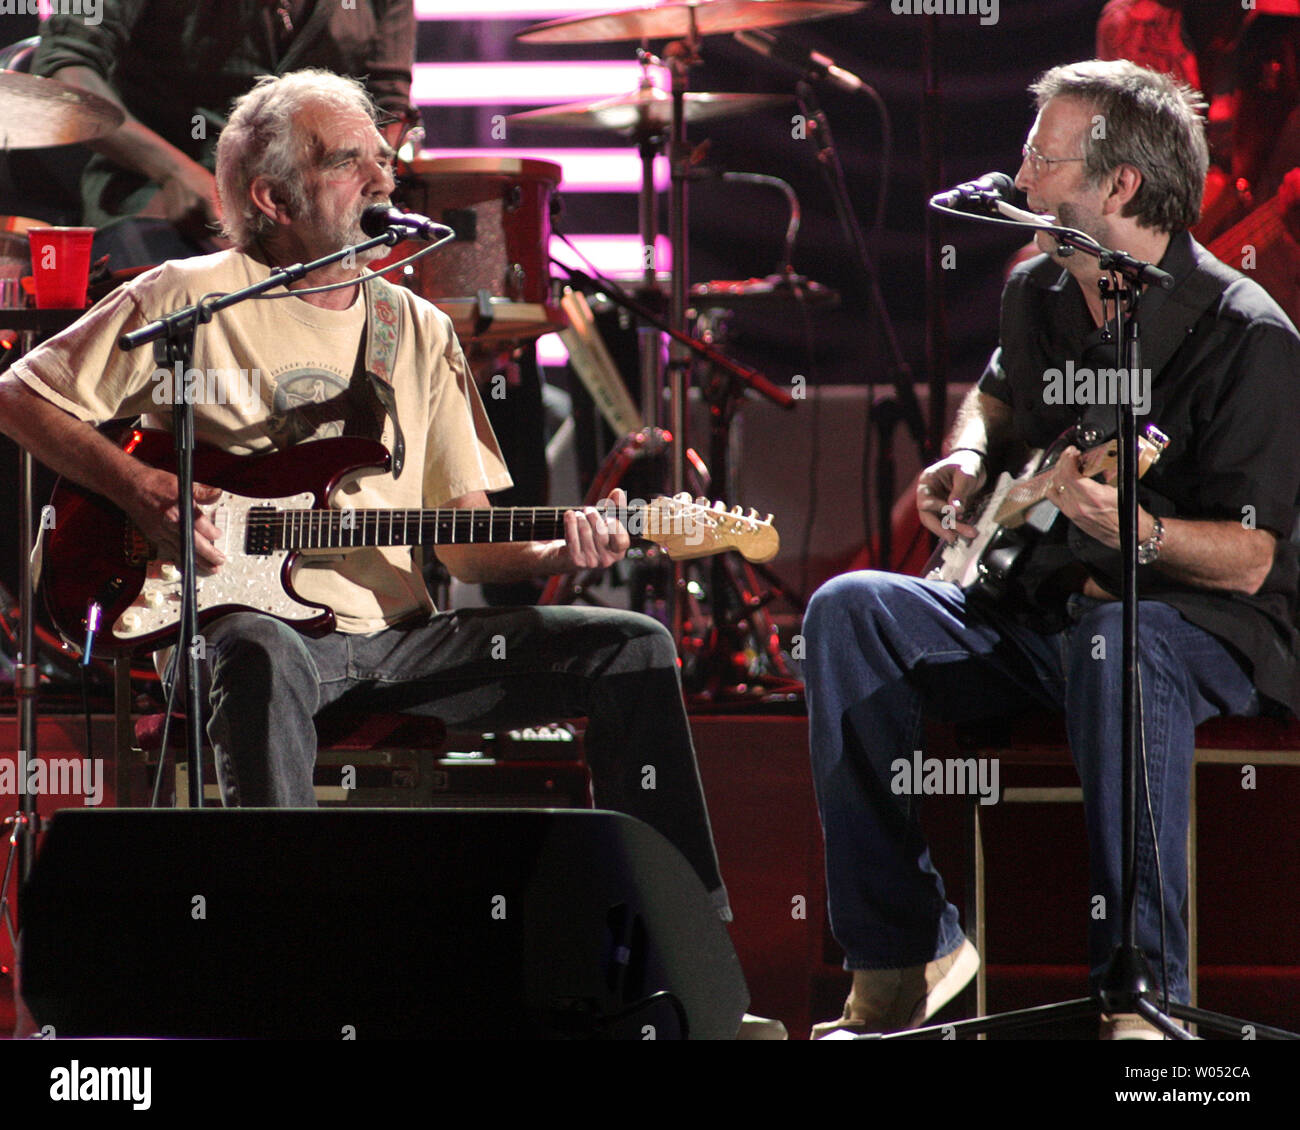 J.J. Cale (L) and Eric Clapton perform in concert at the ipayOne Center in San Diego on March 15, 2007.   (UPI Photo/Roger Williams) Stock Photo